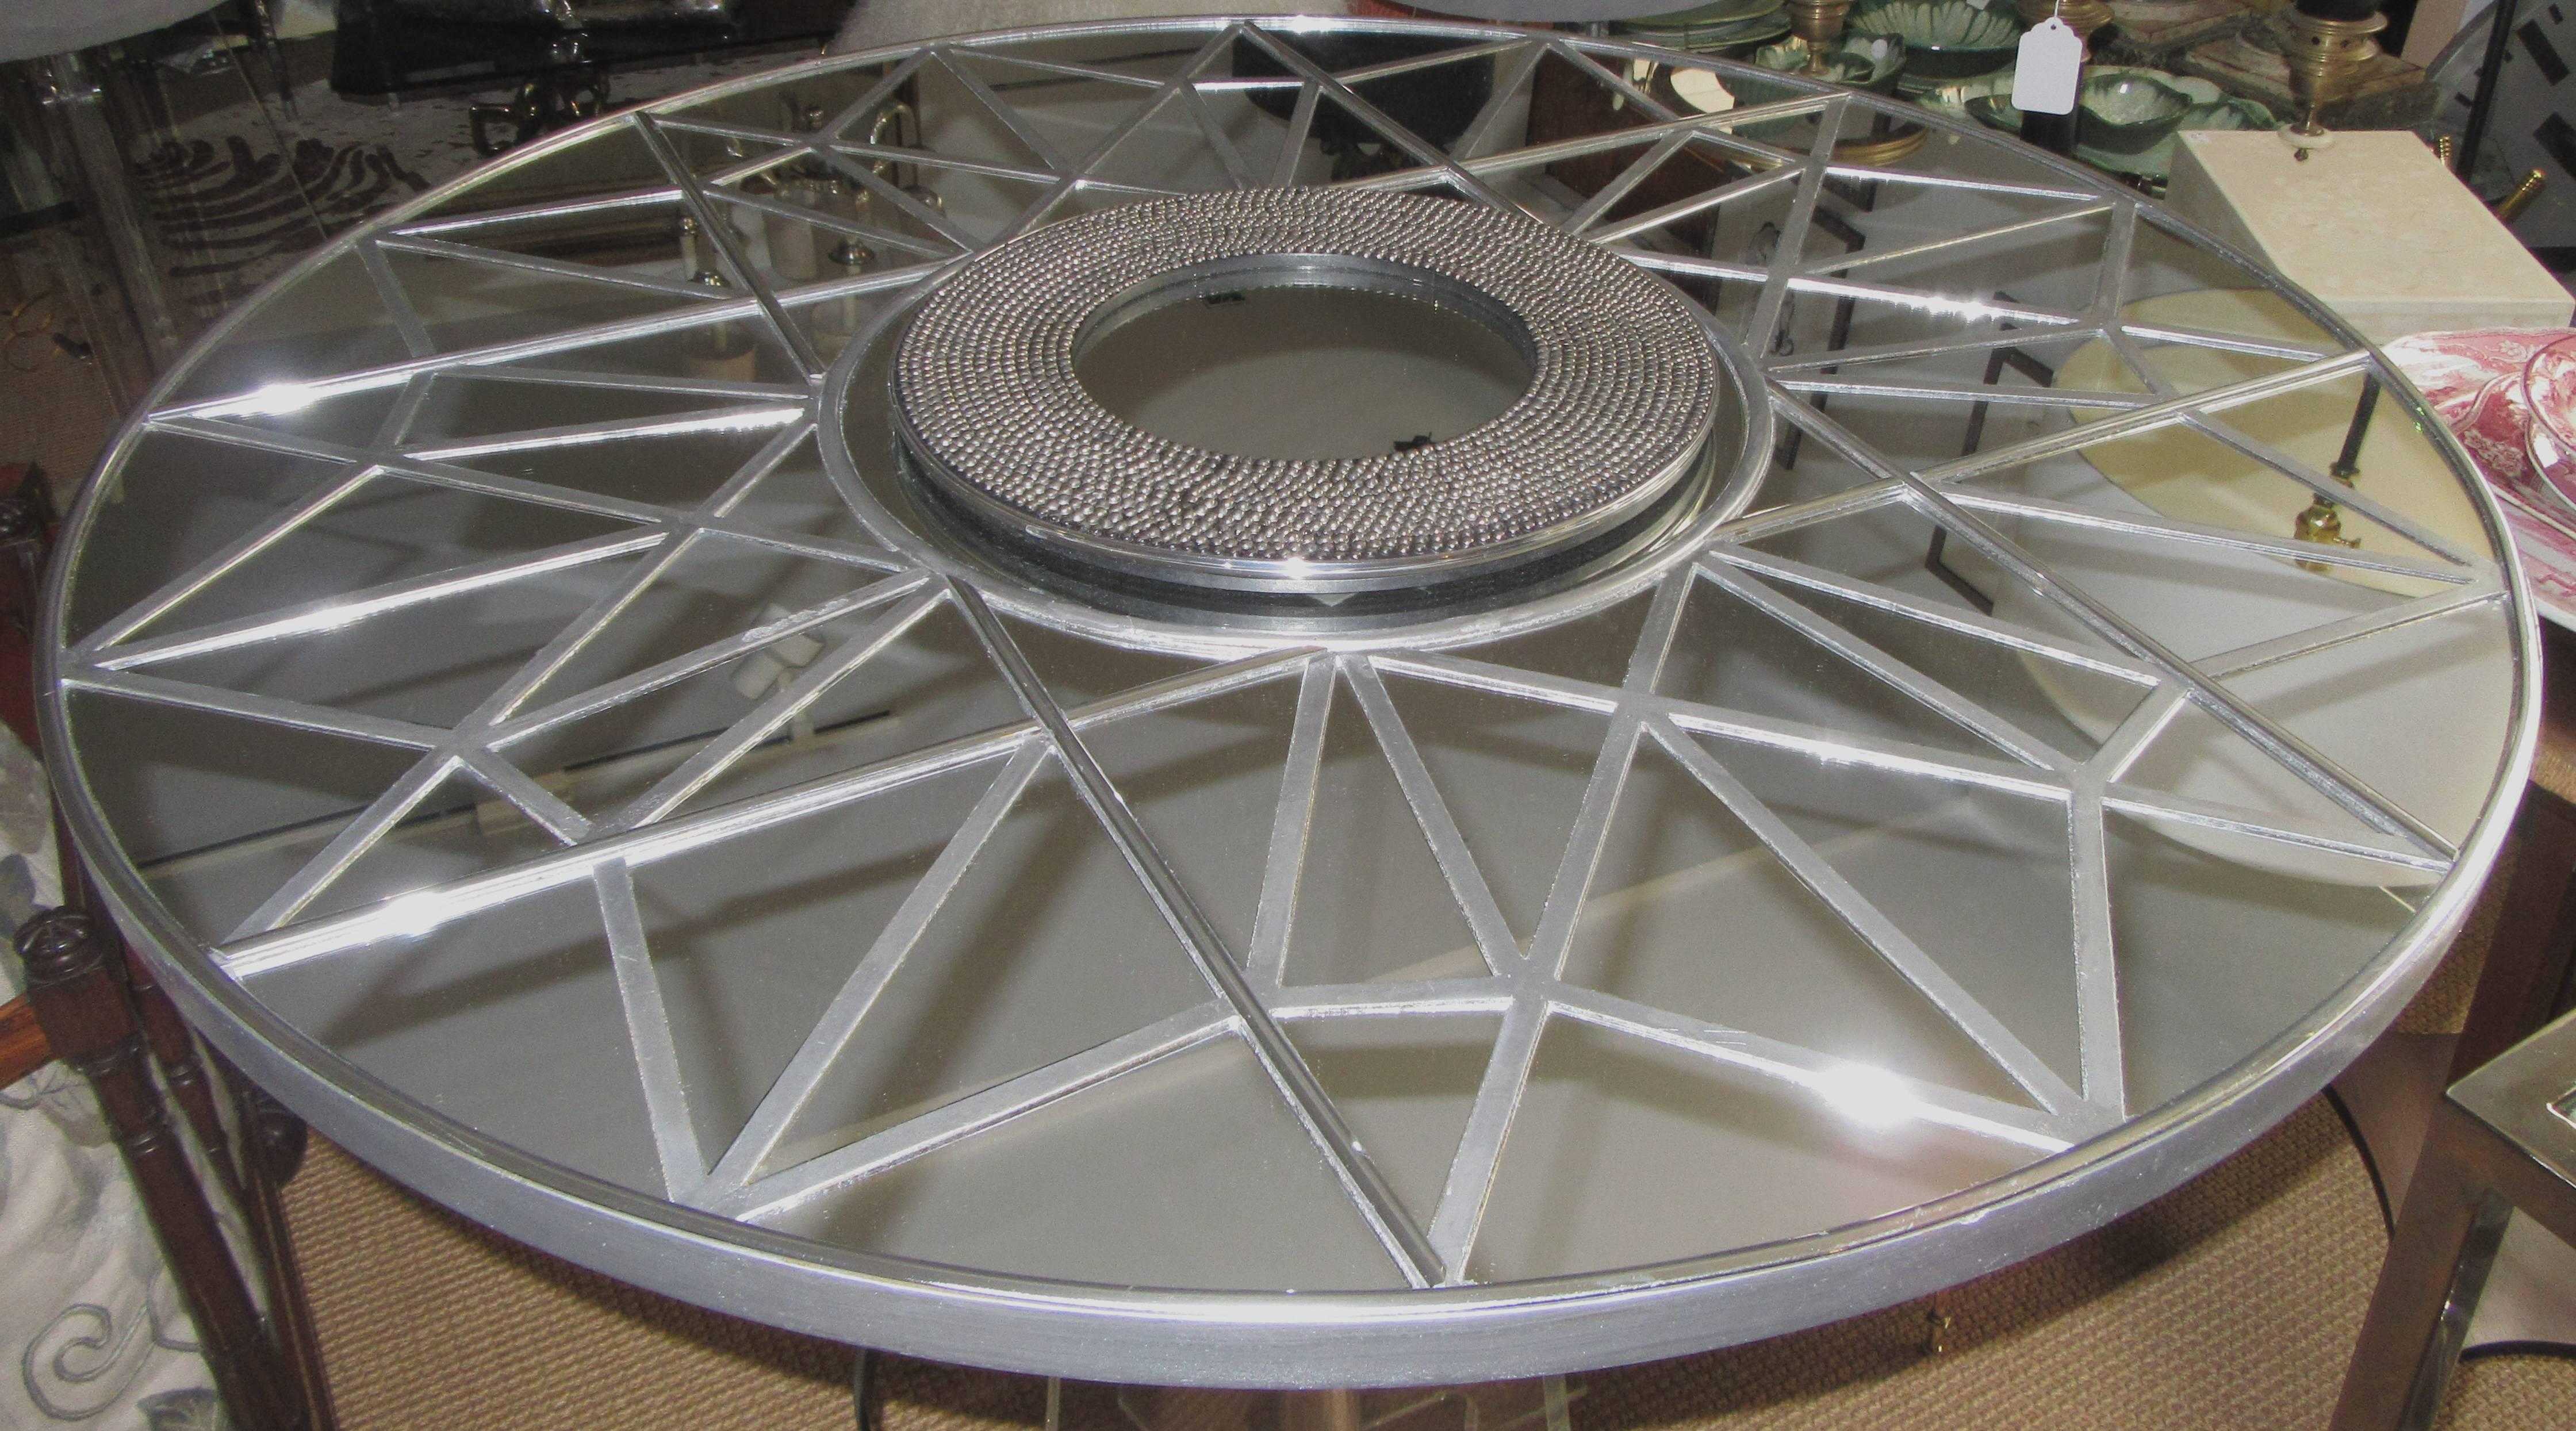 A large round mirror divided into geometric segments. The center is a circle of metal studs.